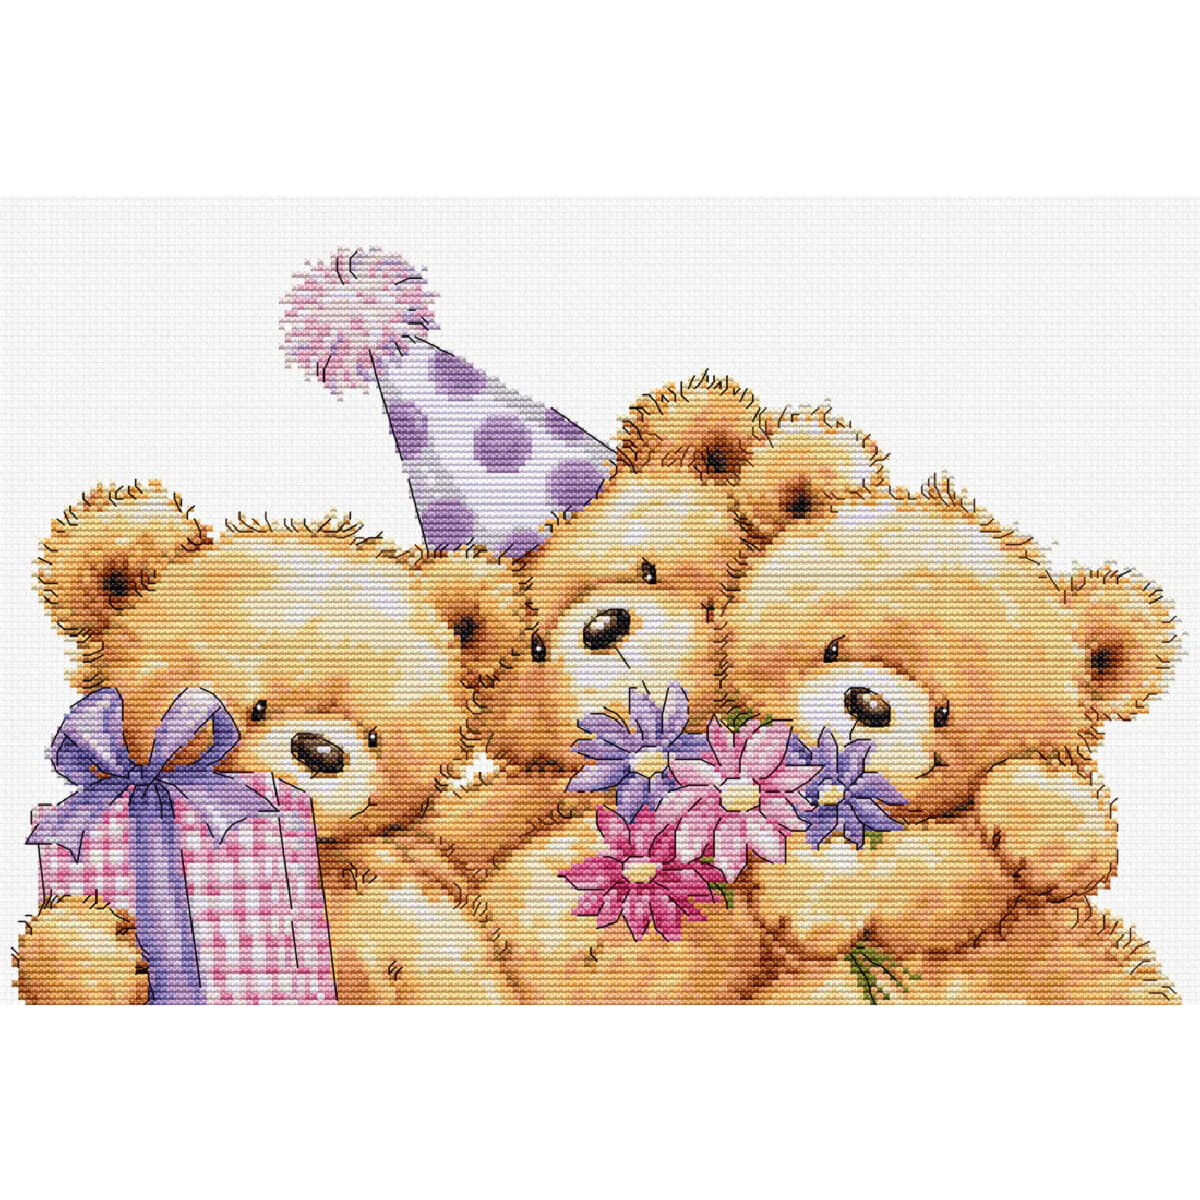 This animated picture shows three adorable teddy bears....